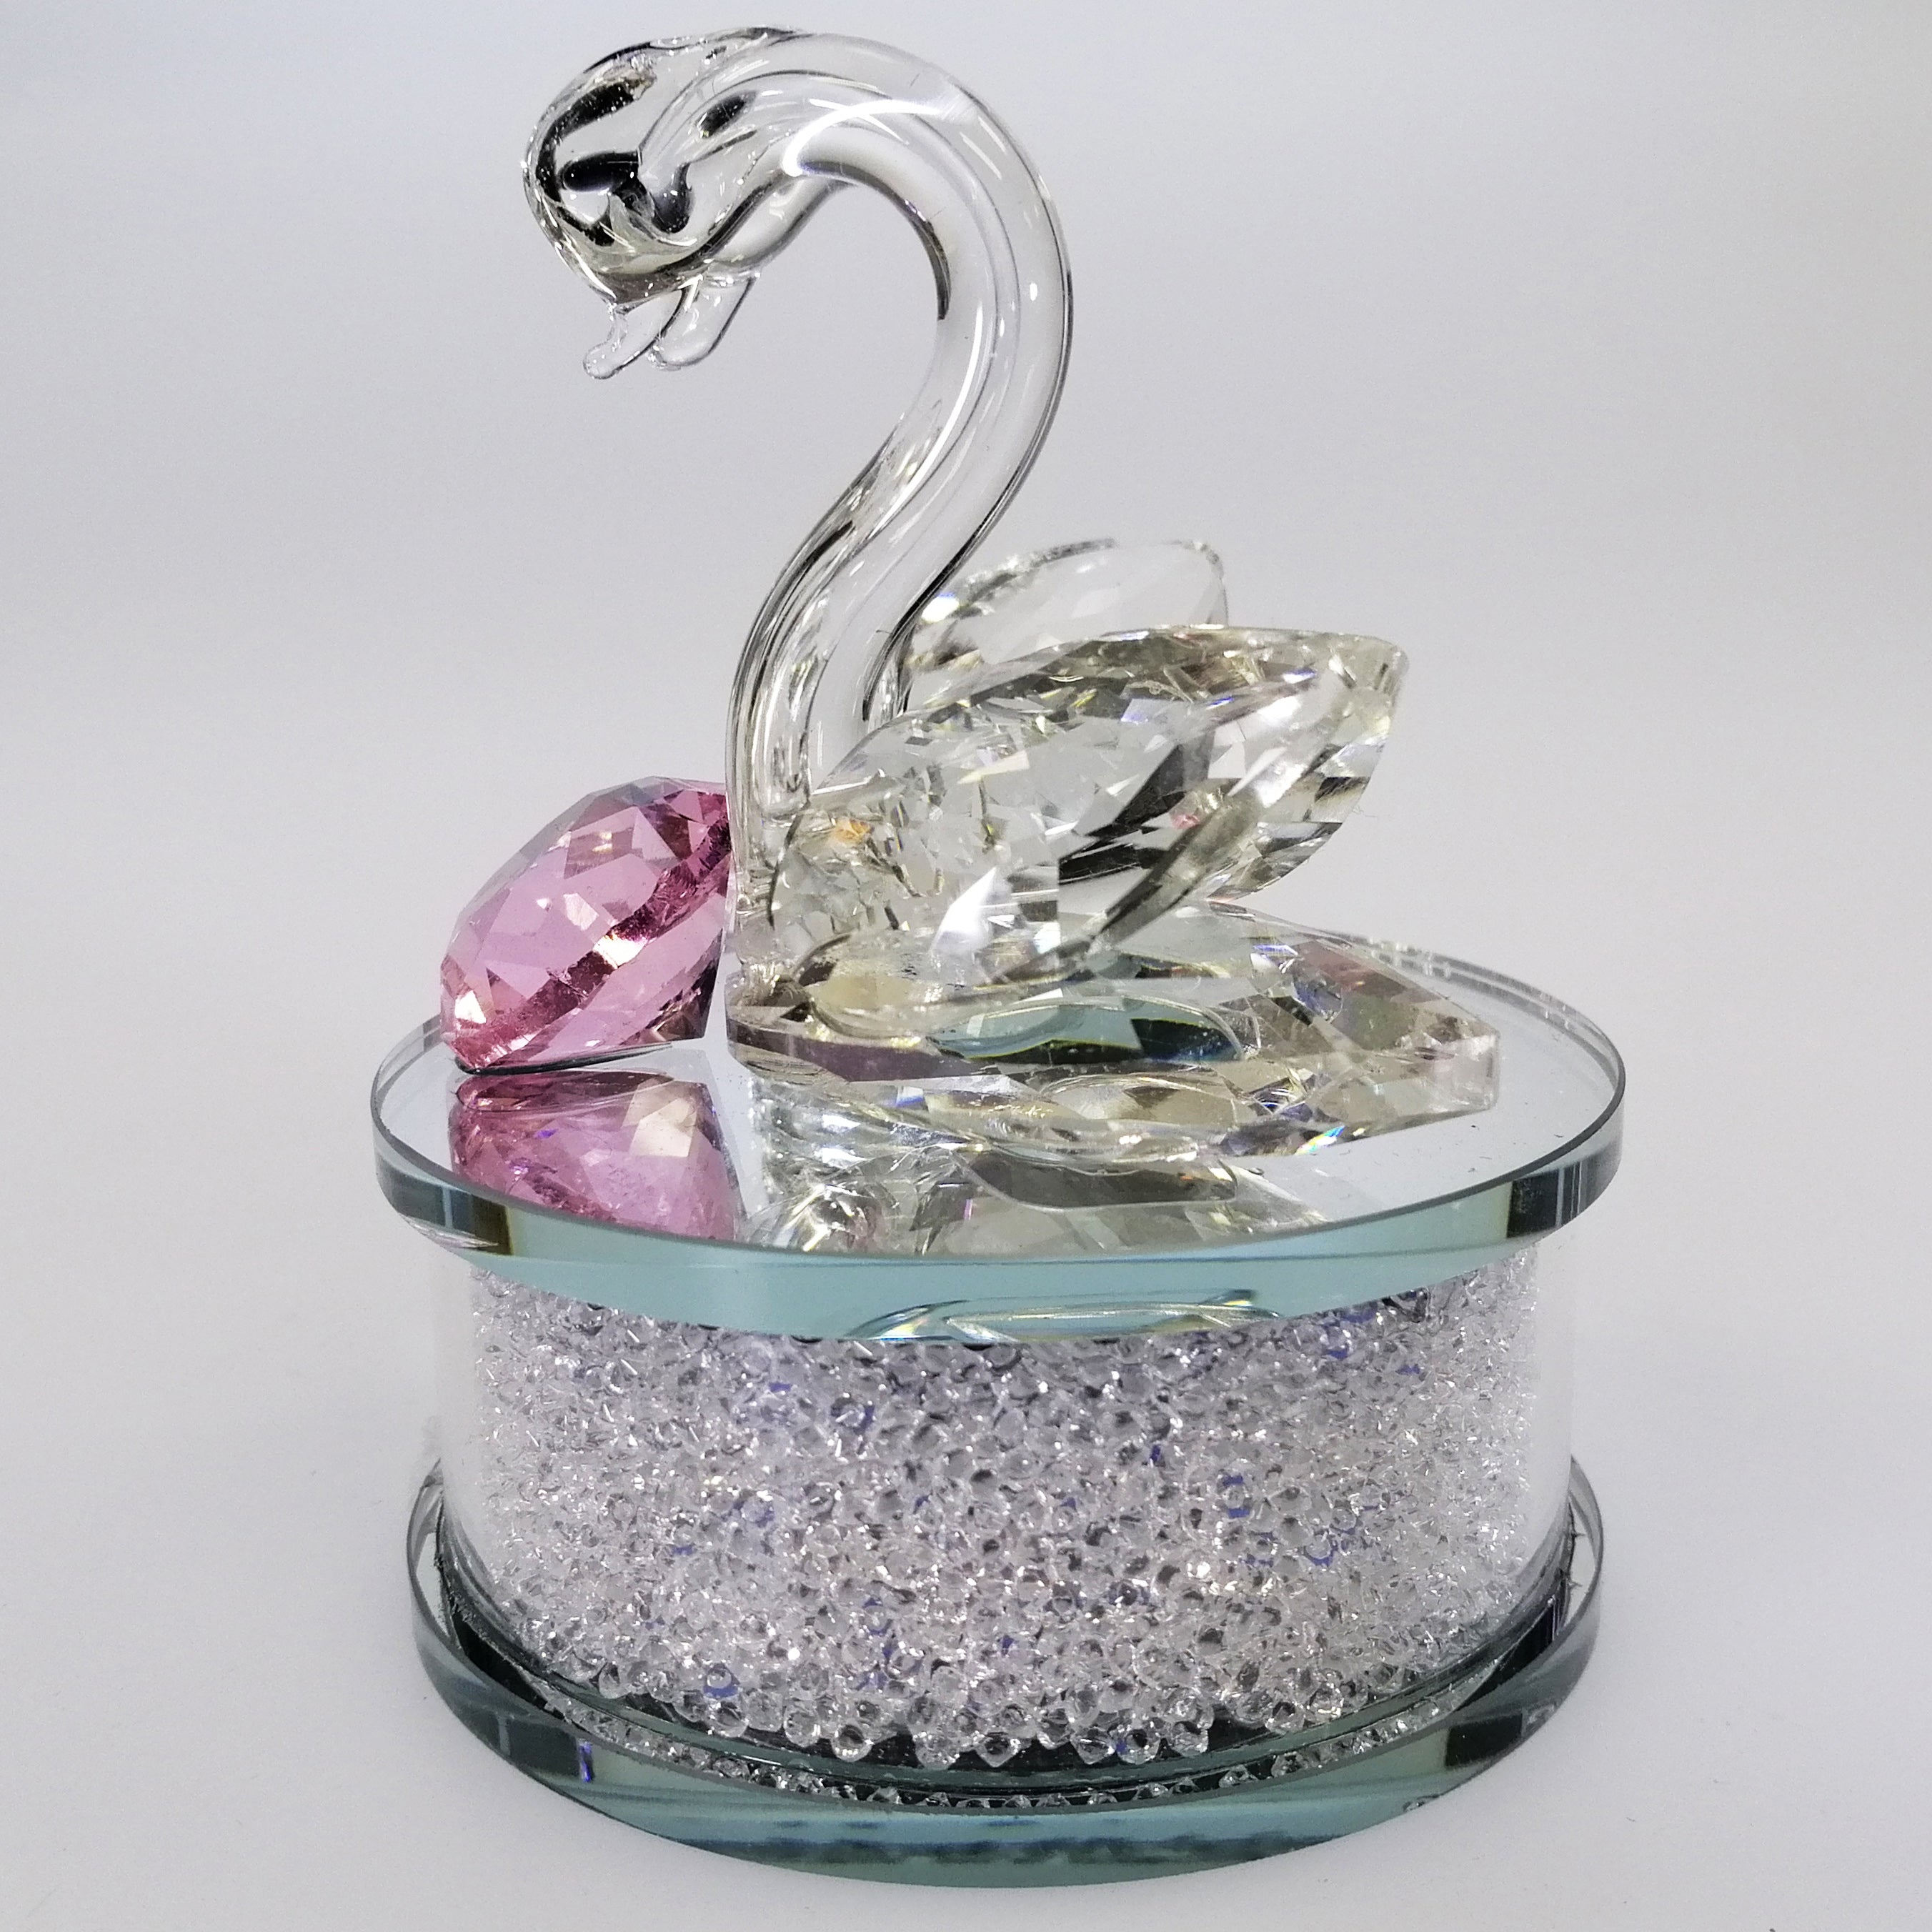 Cut Glass Swans with Pink Diamond on Sparkly Base